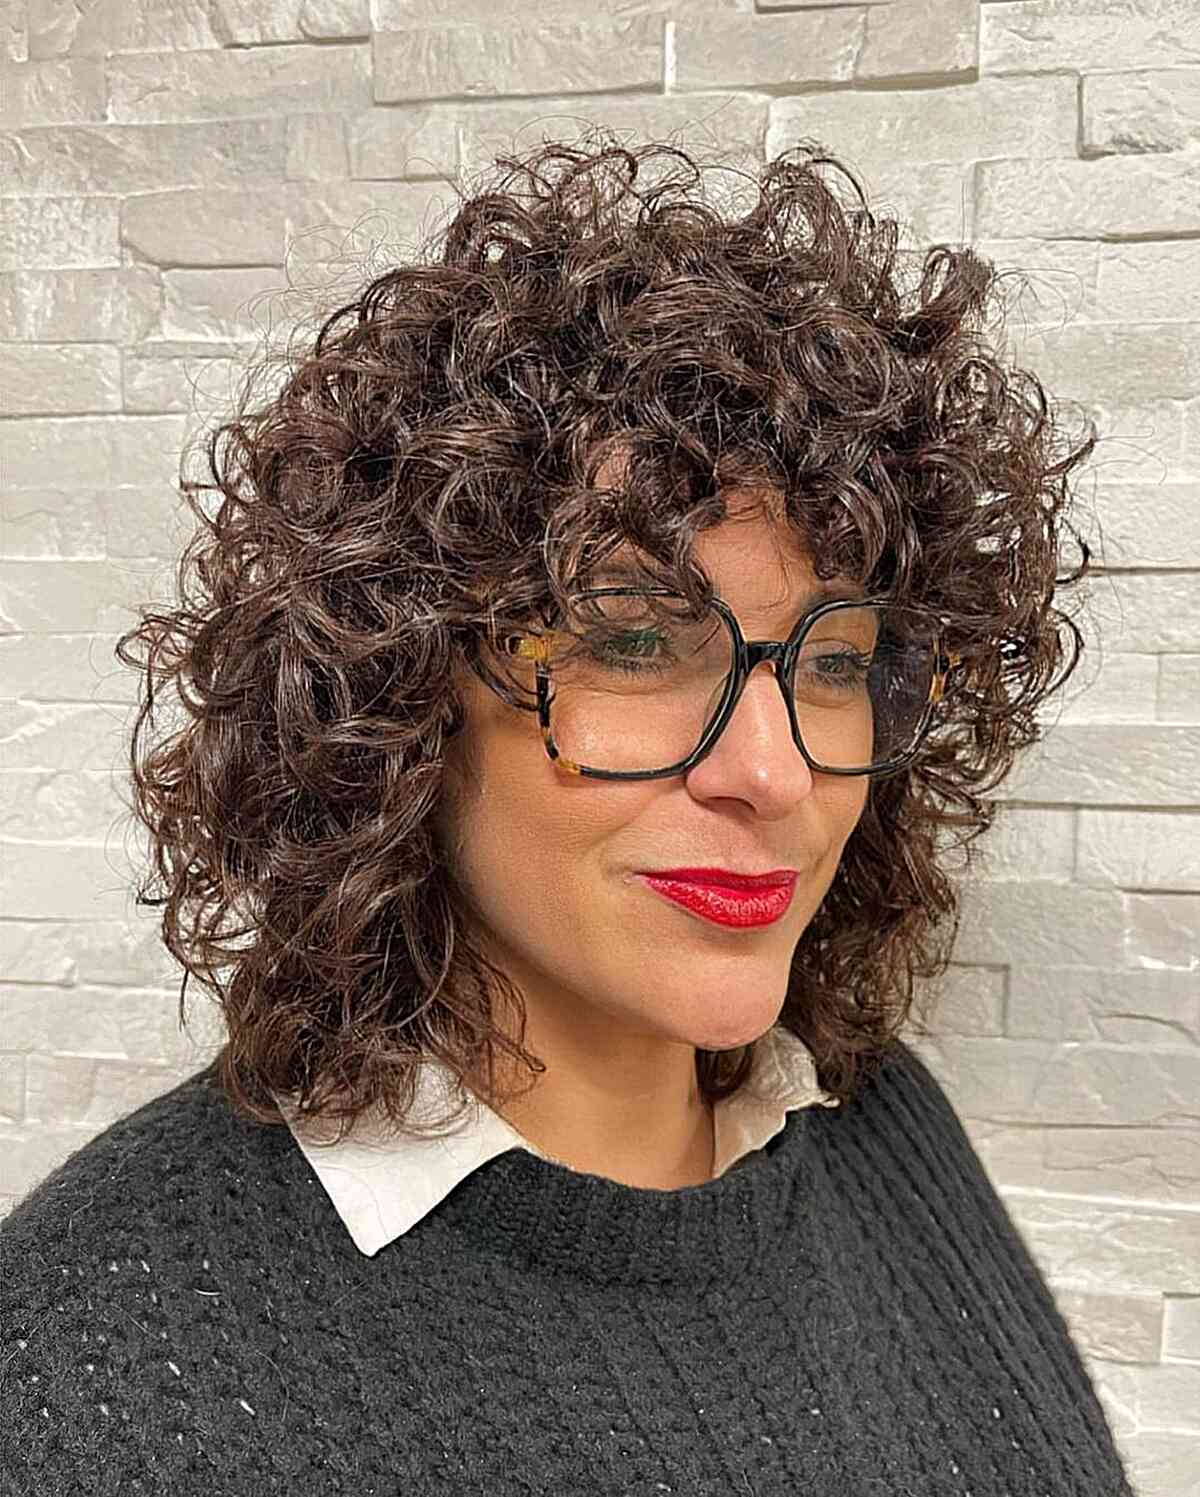 Shoulder-Length Curls for Long Faces with Bangs and glasses